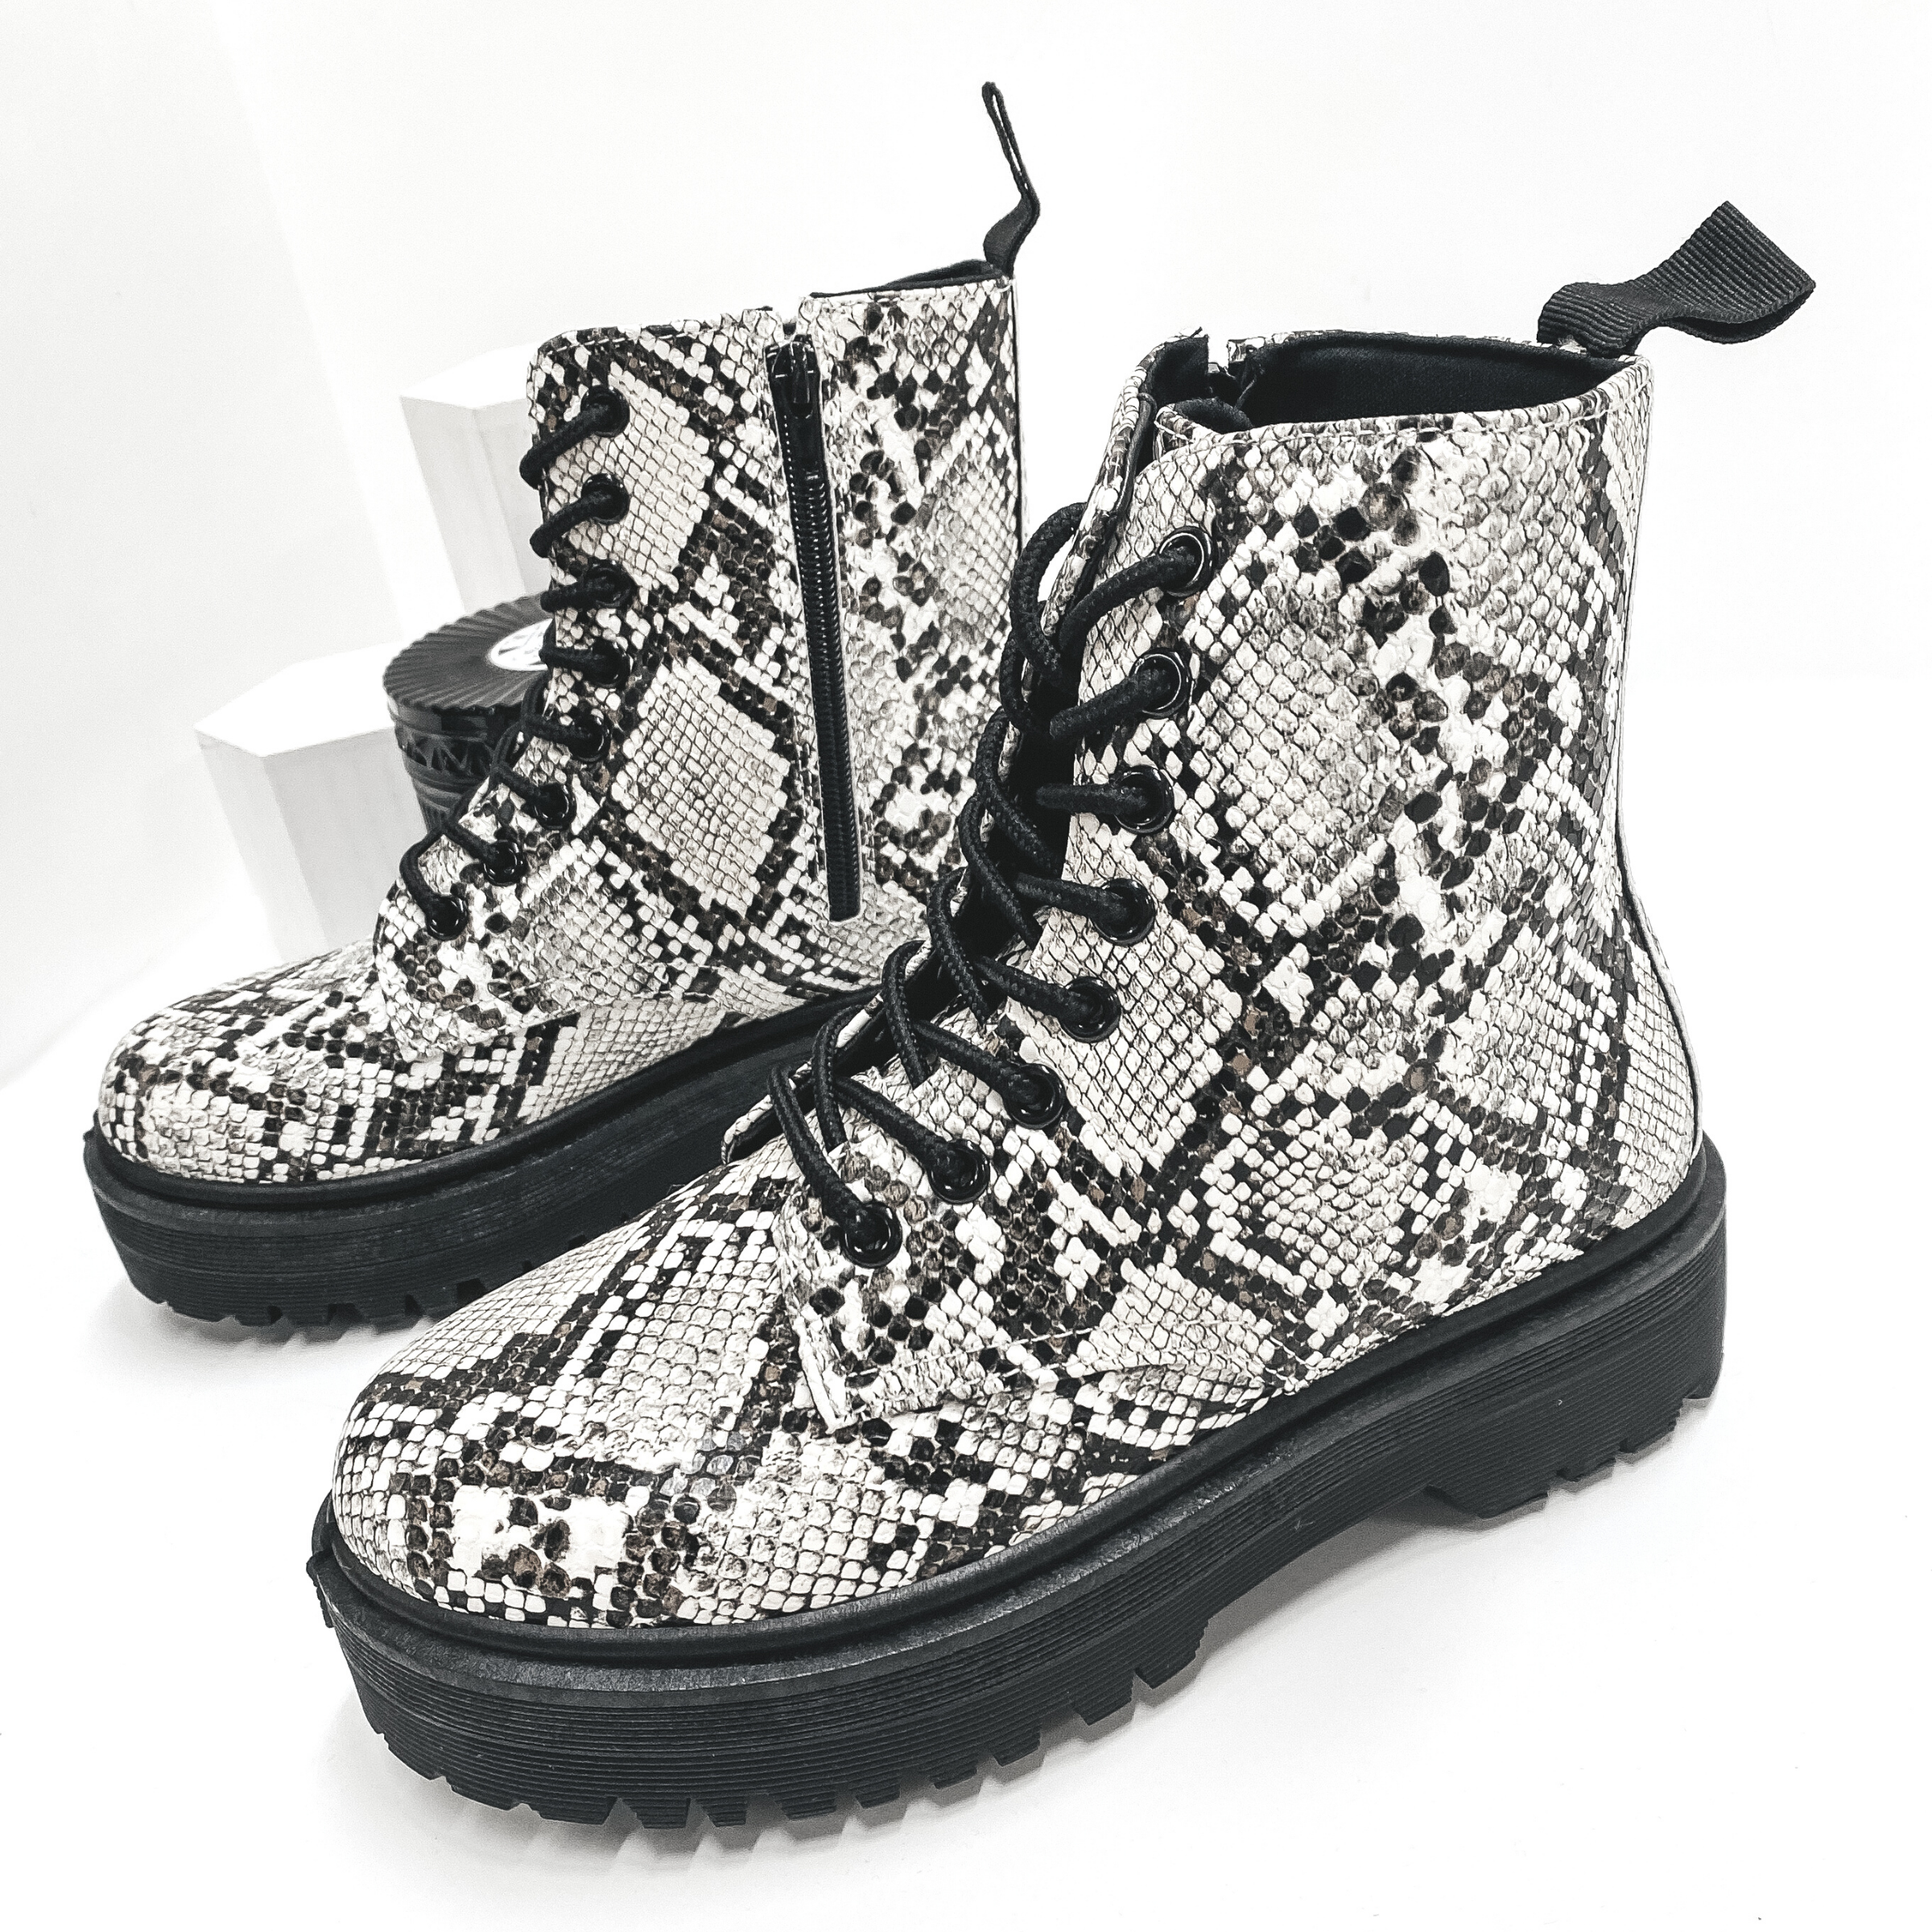 Born to be Wild Combat Boots in Snake